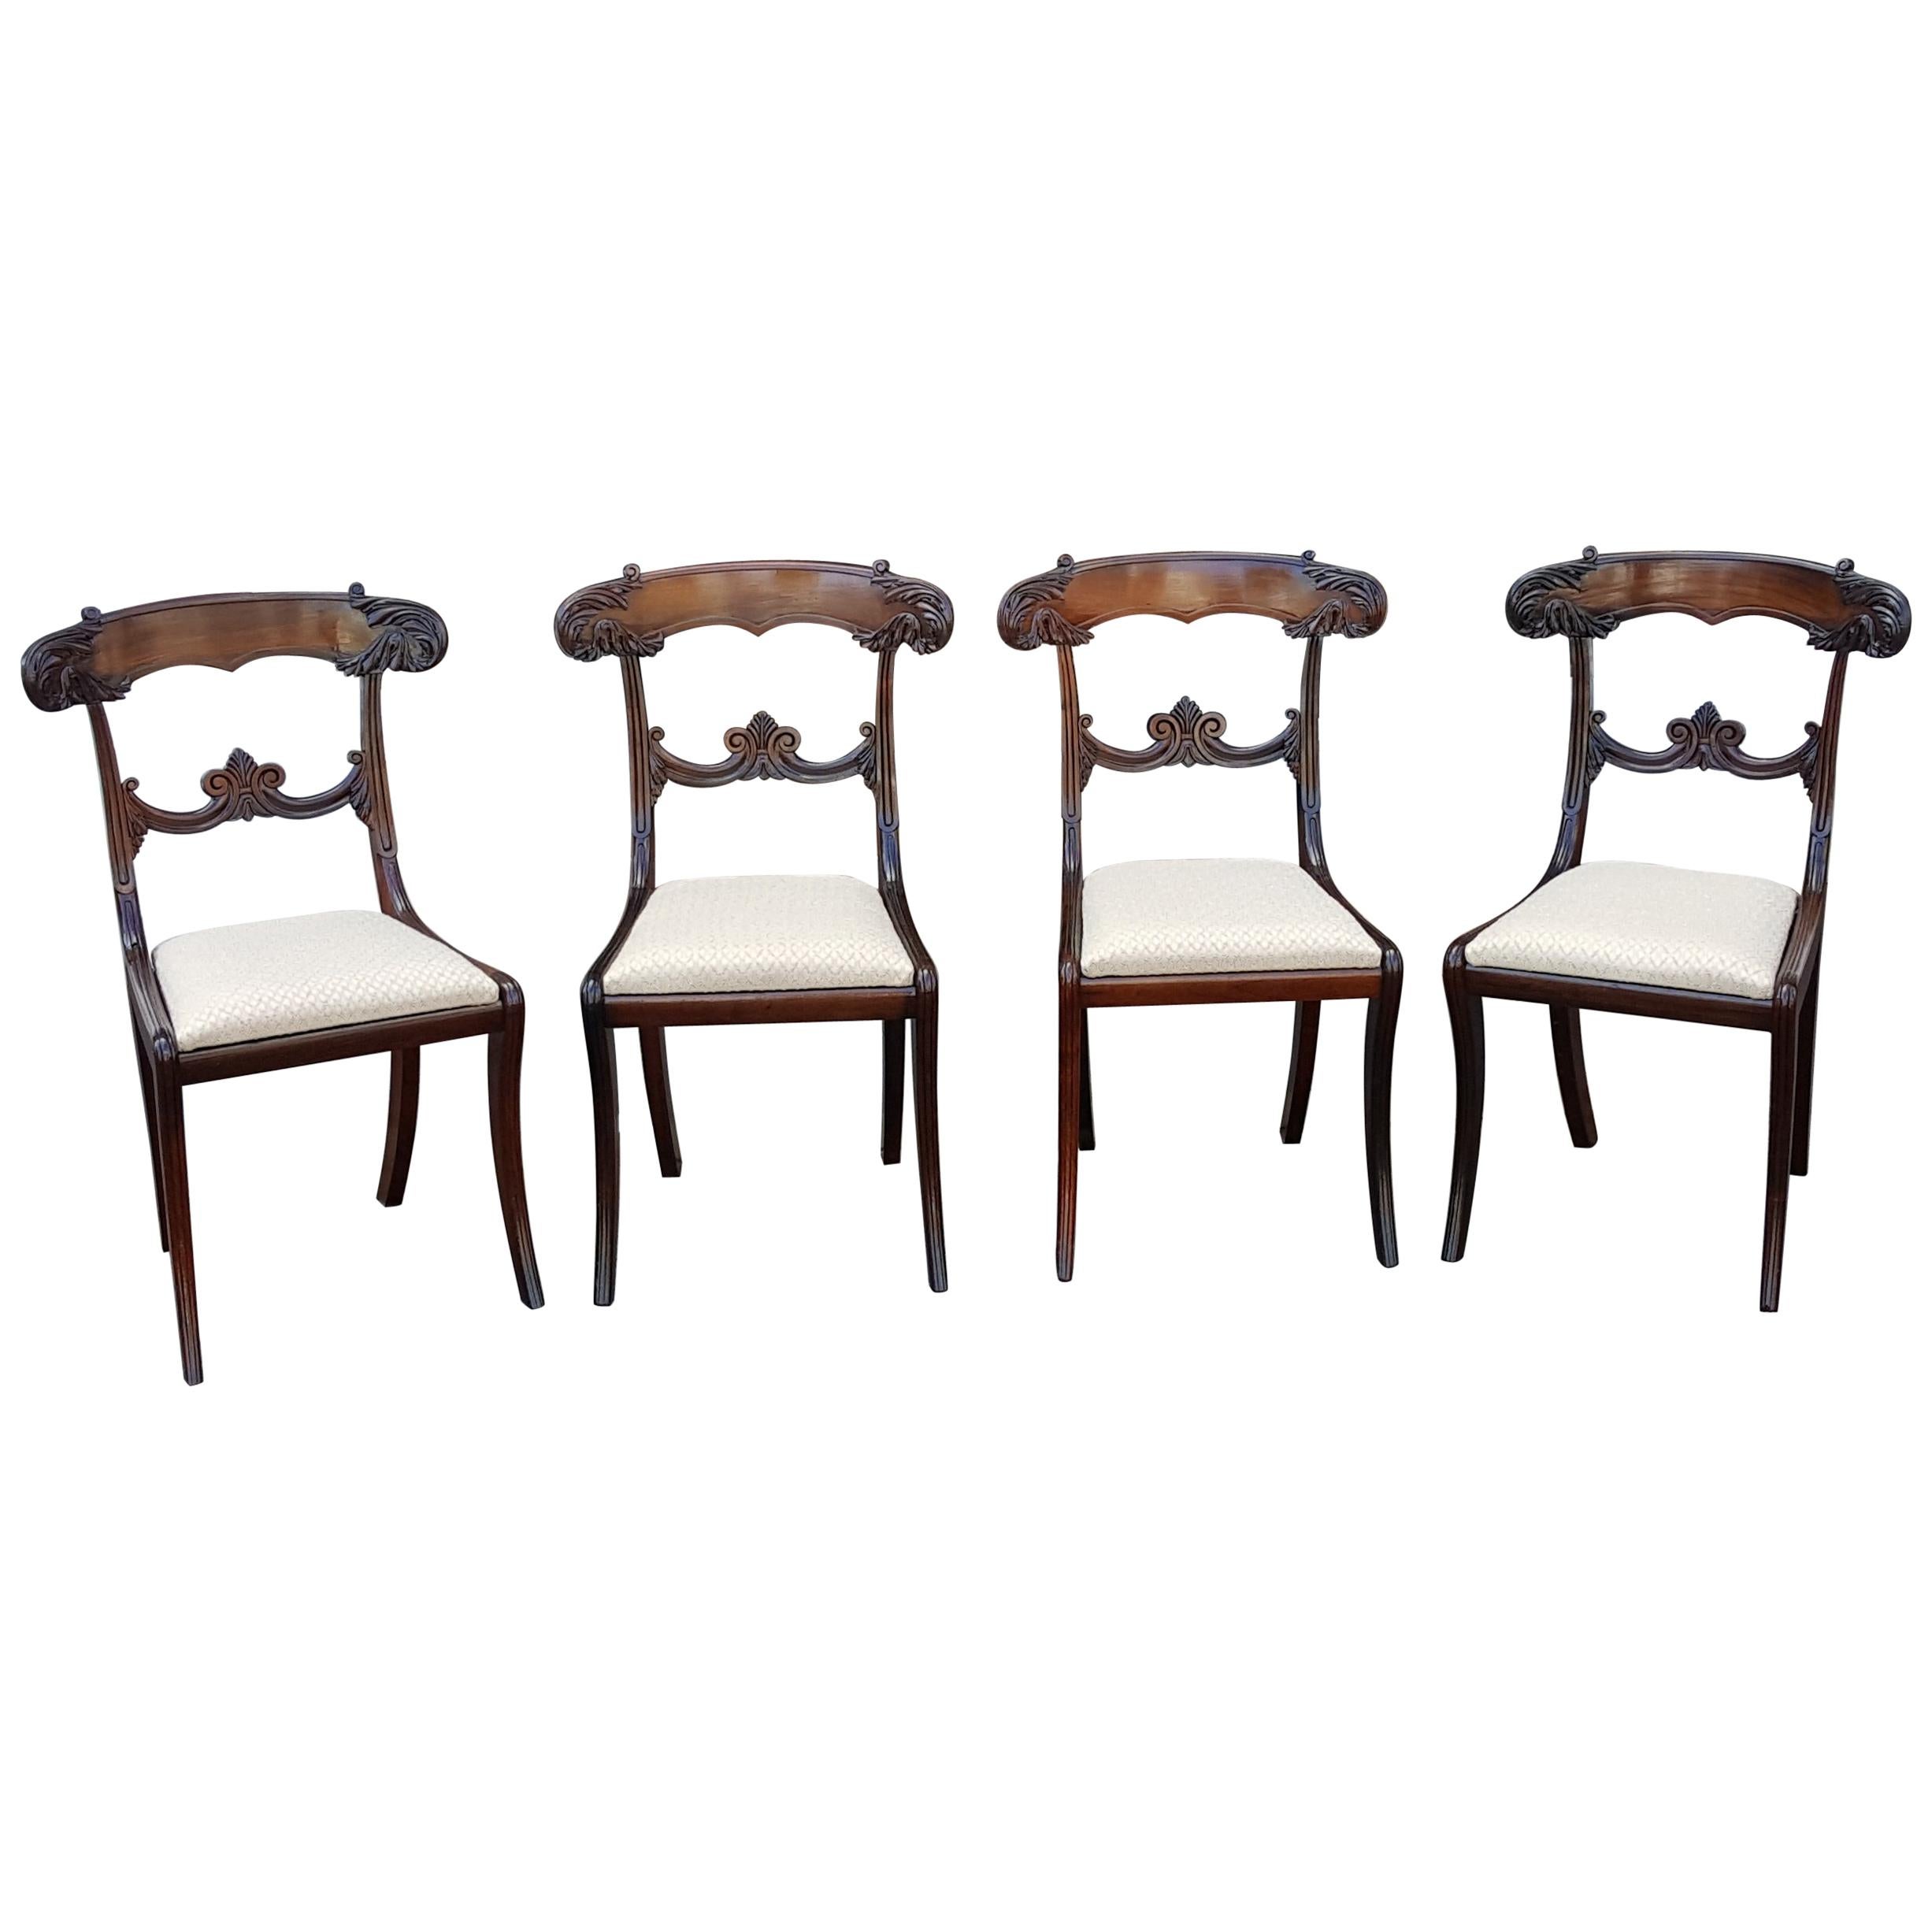 Set of Four Late Regency Rosewood Dining Chairs